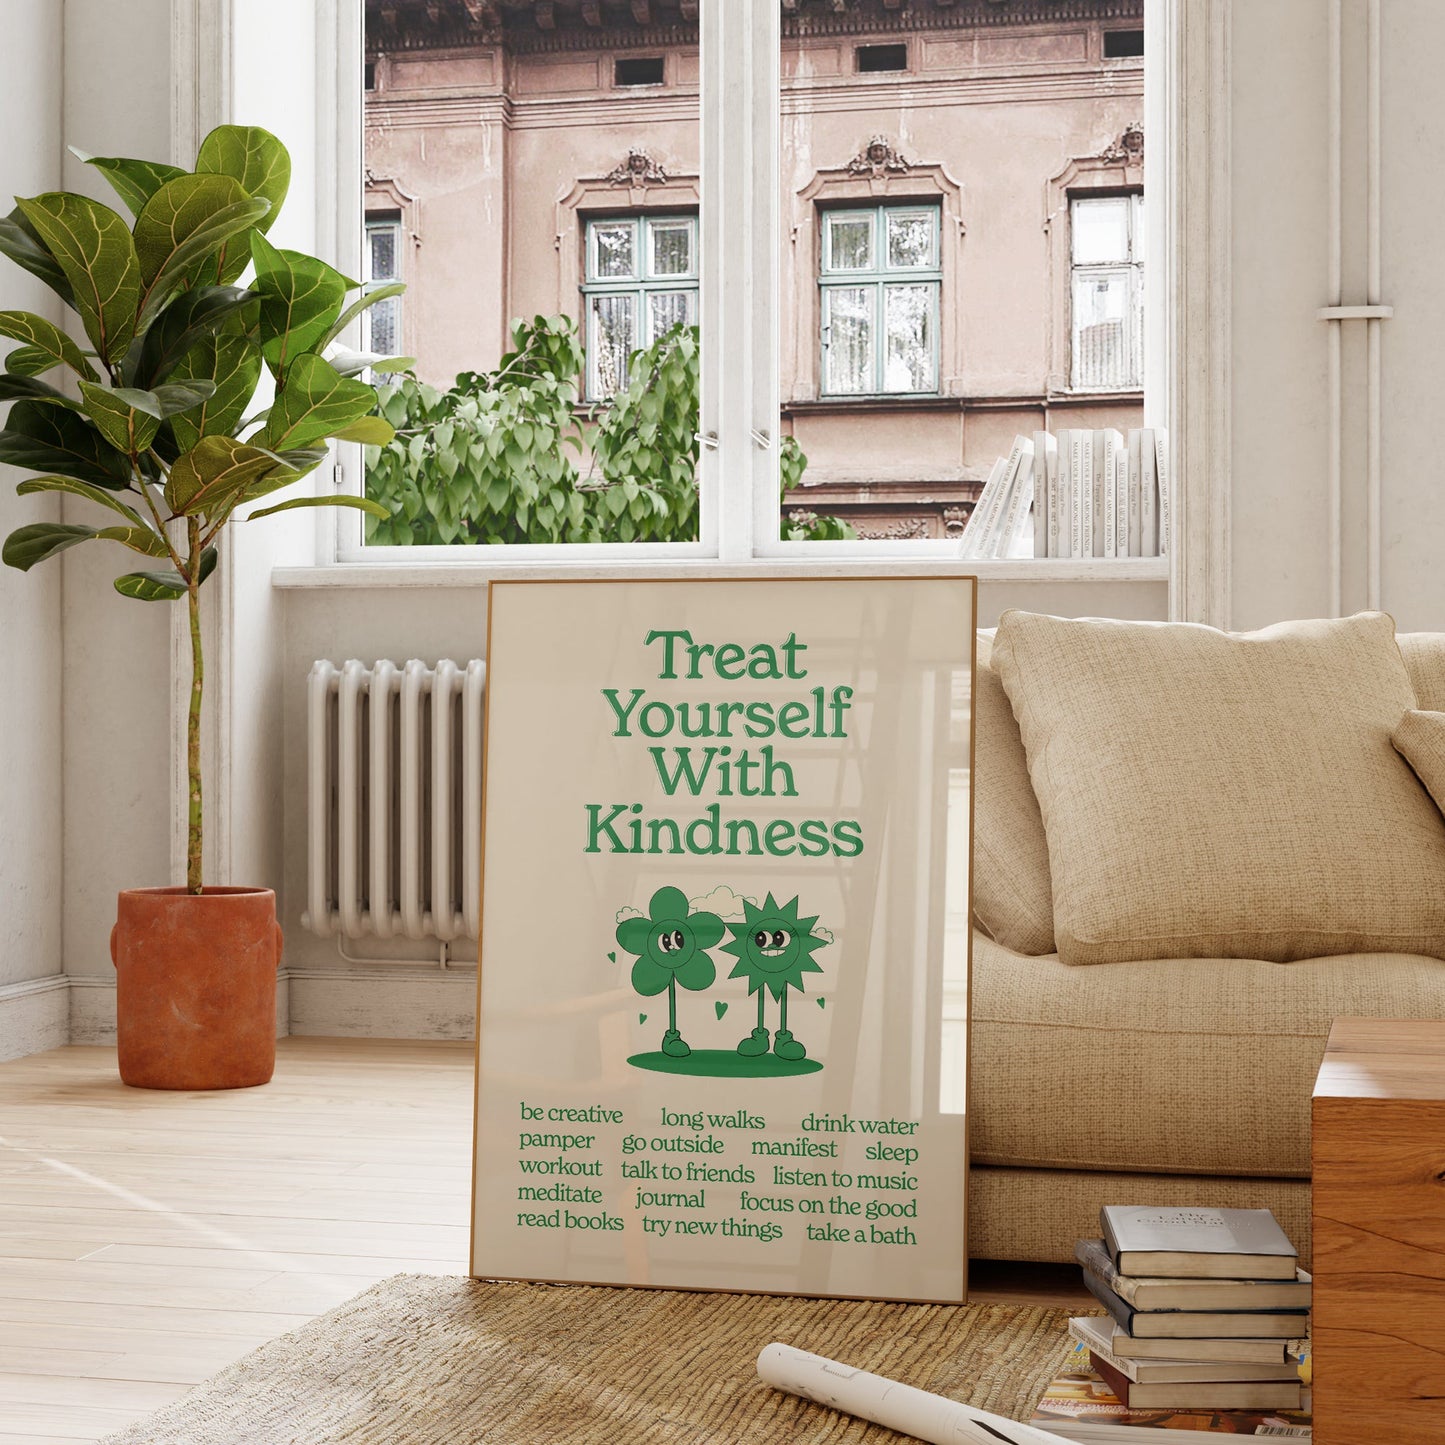 Retro Treat Yourself With Kindness Print